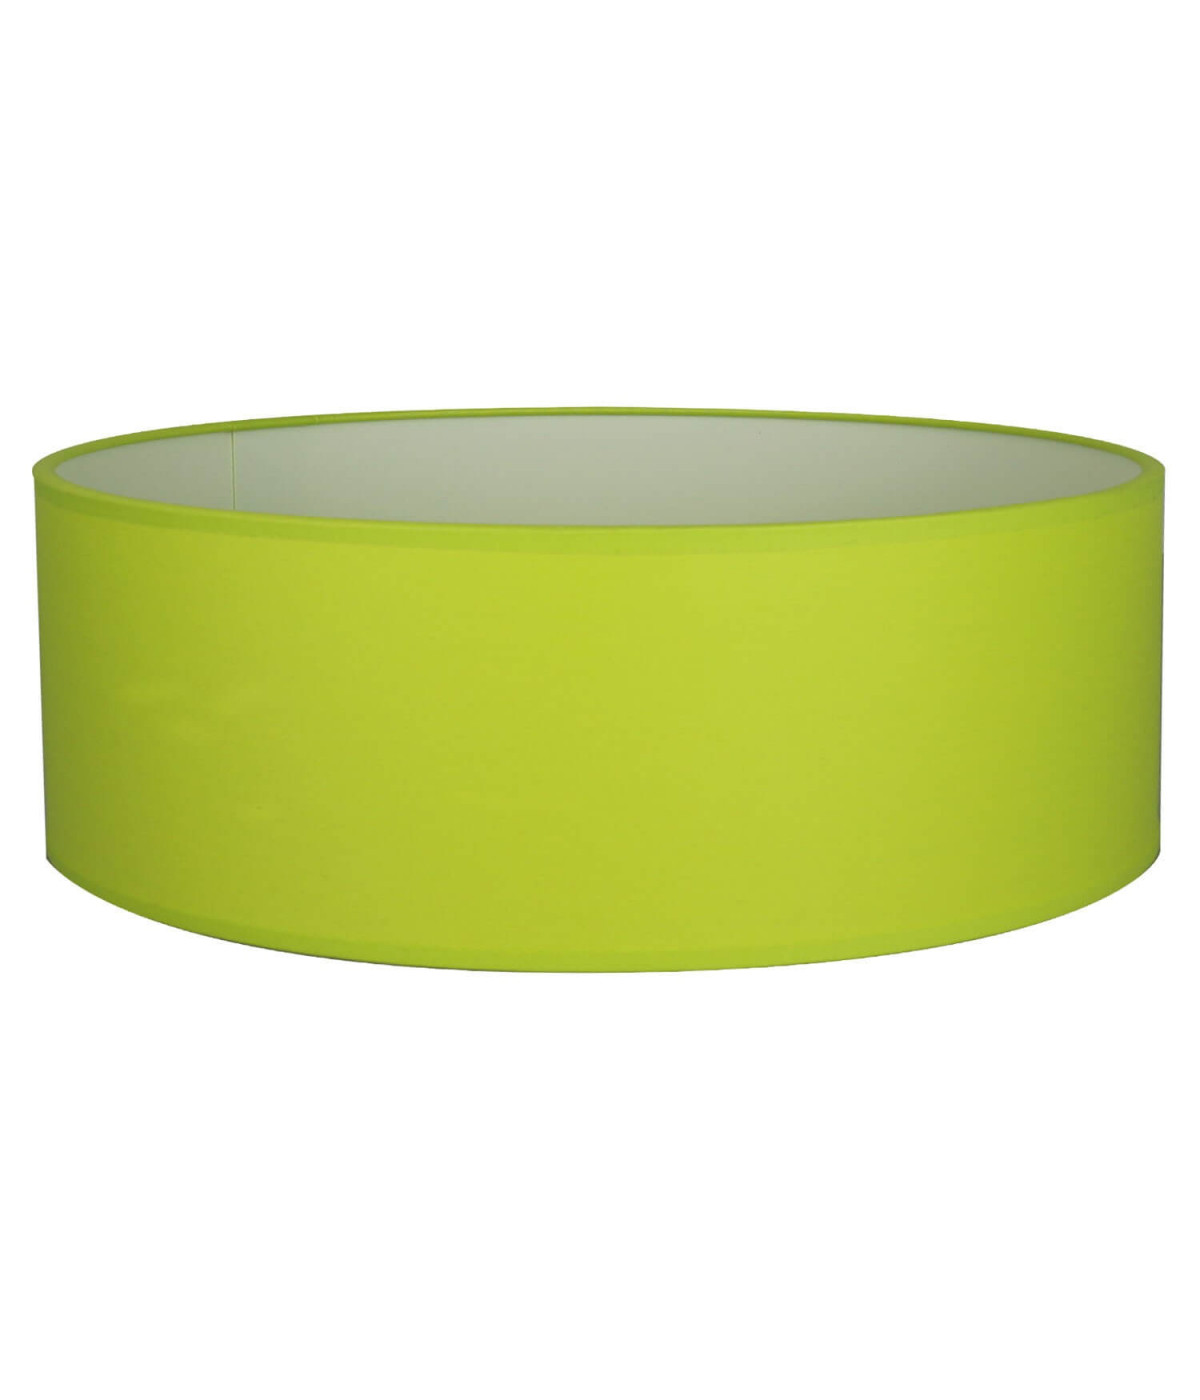 Apple green Oval lampshade